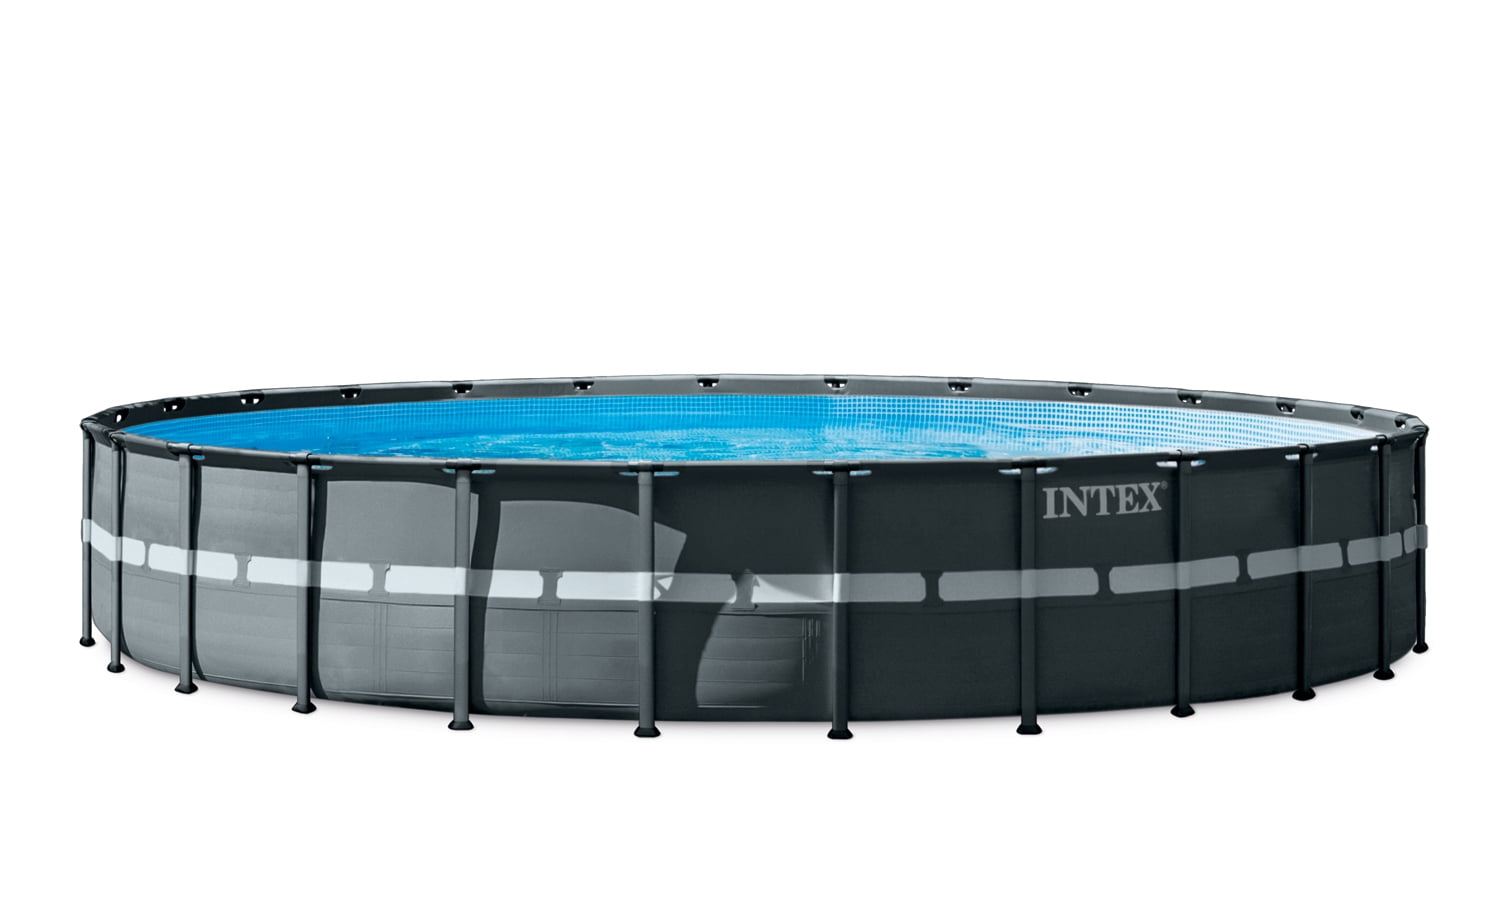 Intex 26ft X 52in Ultra XTR Round Frame Pool Set with Sand Filter Pump